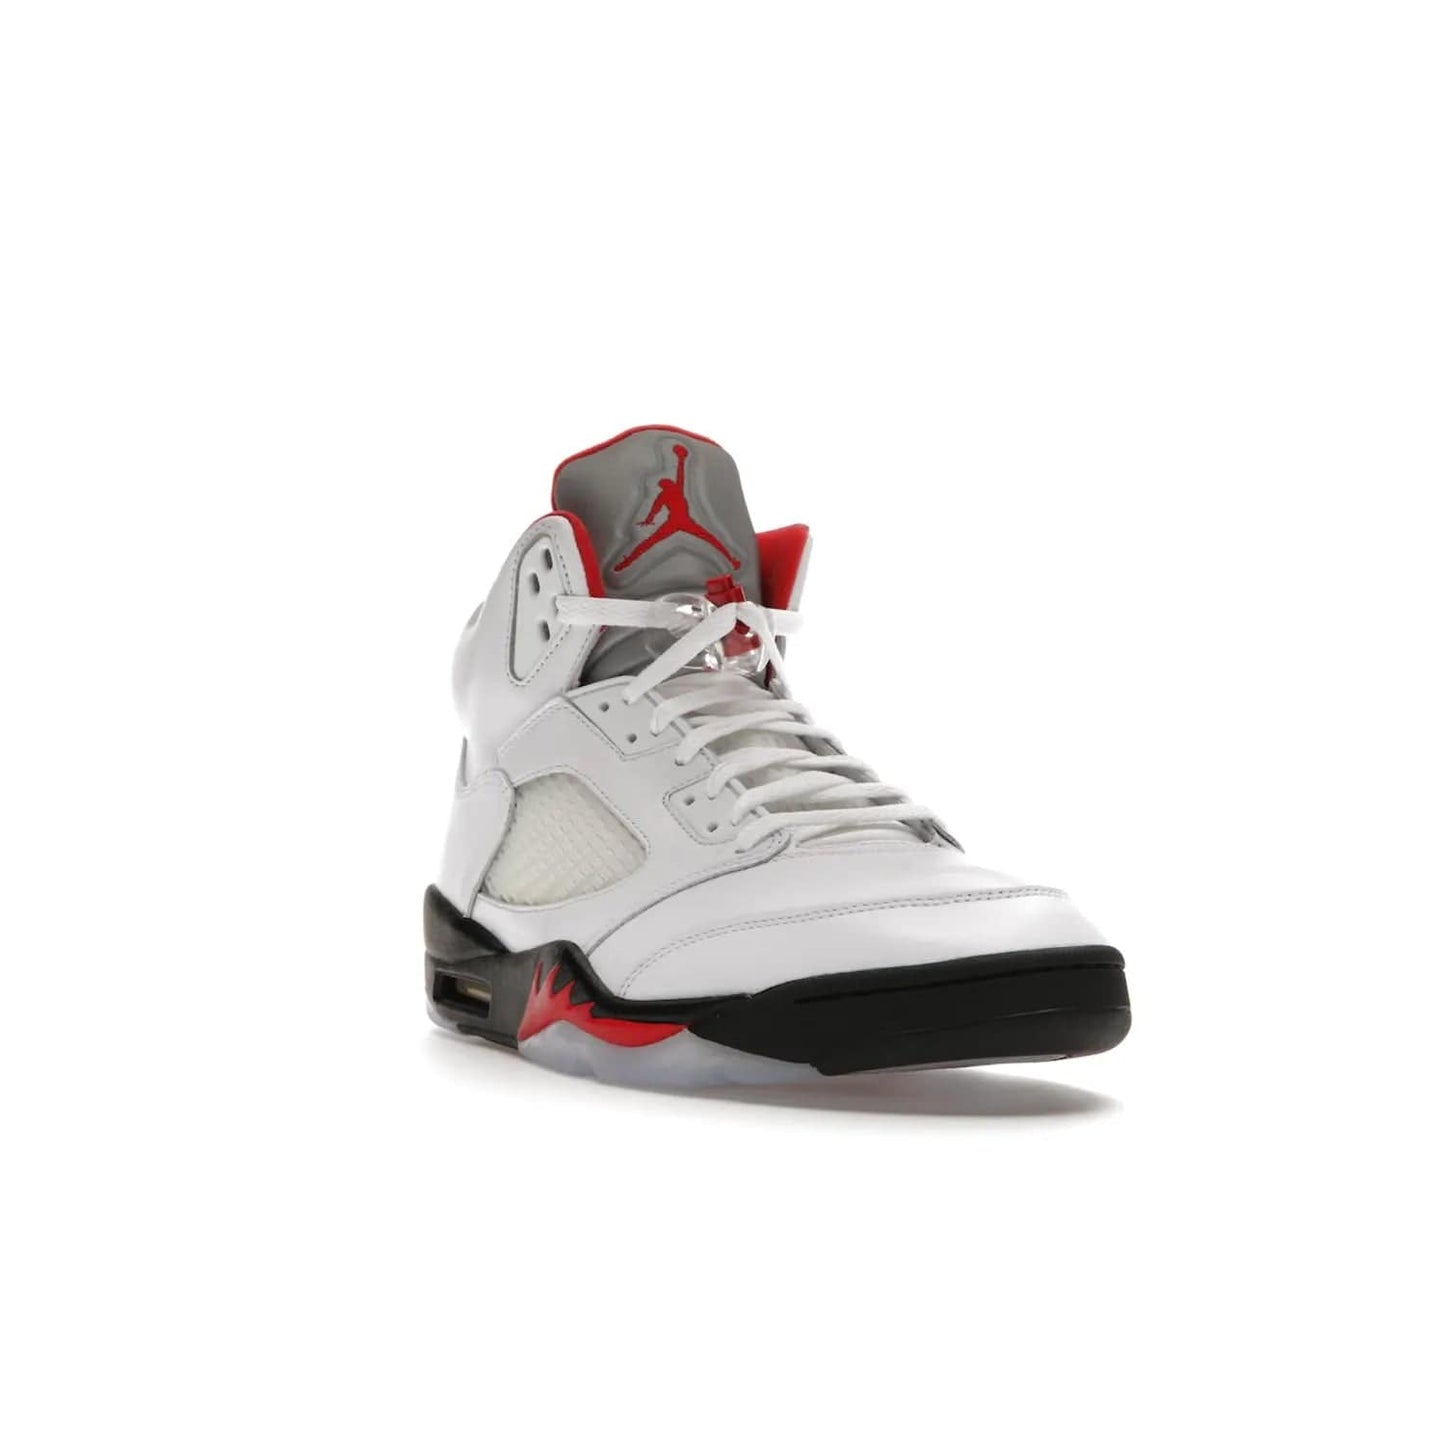 Jordan 5 Retro Fire Red Silver Tongue (2020) - Image 7 - Only at www.BallersClubKickz.com - Experience classic styling with the Jordan 5 Retro Fire Red Silver Tongue (2020). Features a white leather upper, 3M reflective tongue, midsole colorblocking, and an icy translucent outsole. Now available, upgrade your shoe collection today.